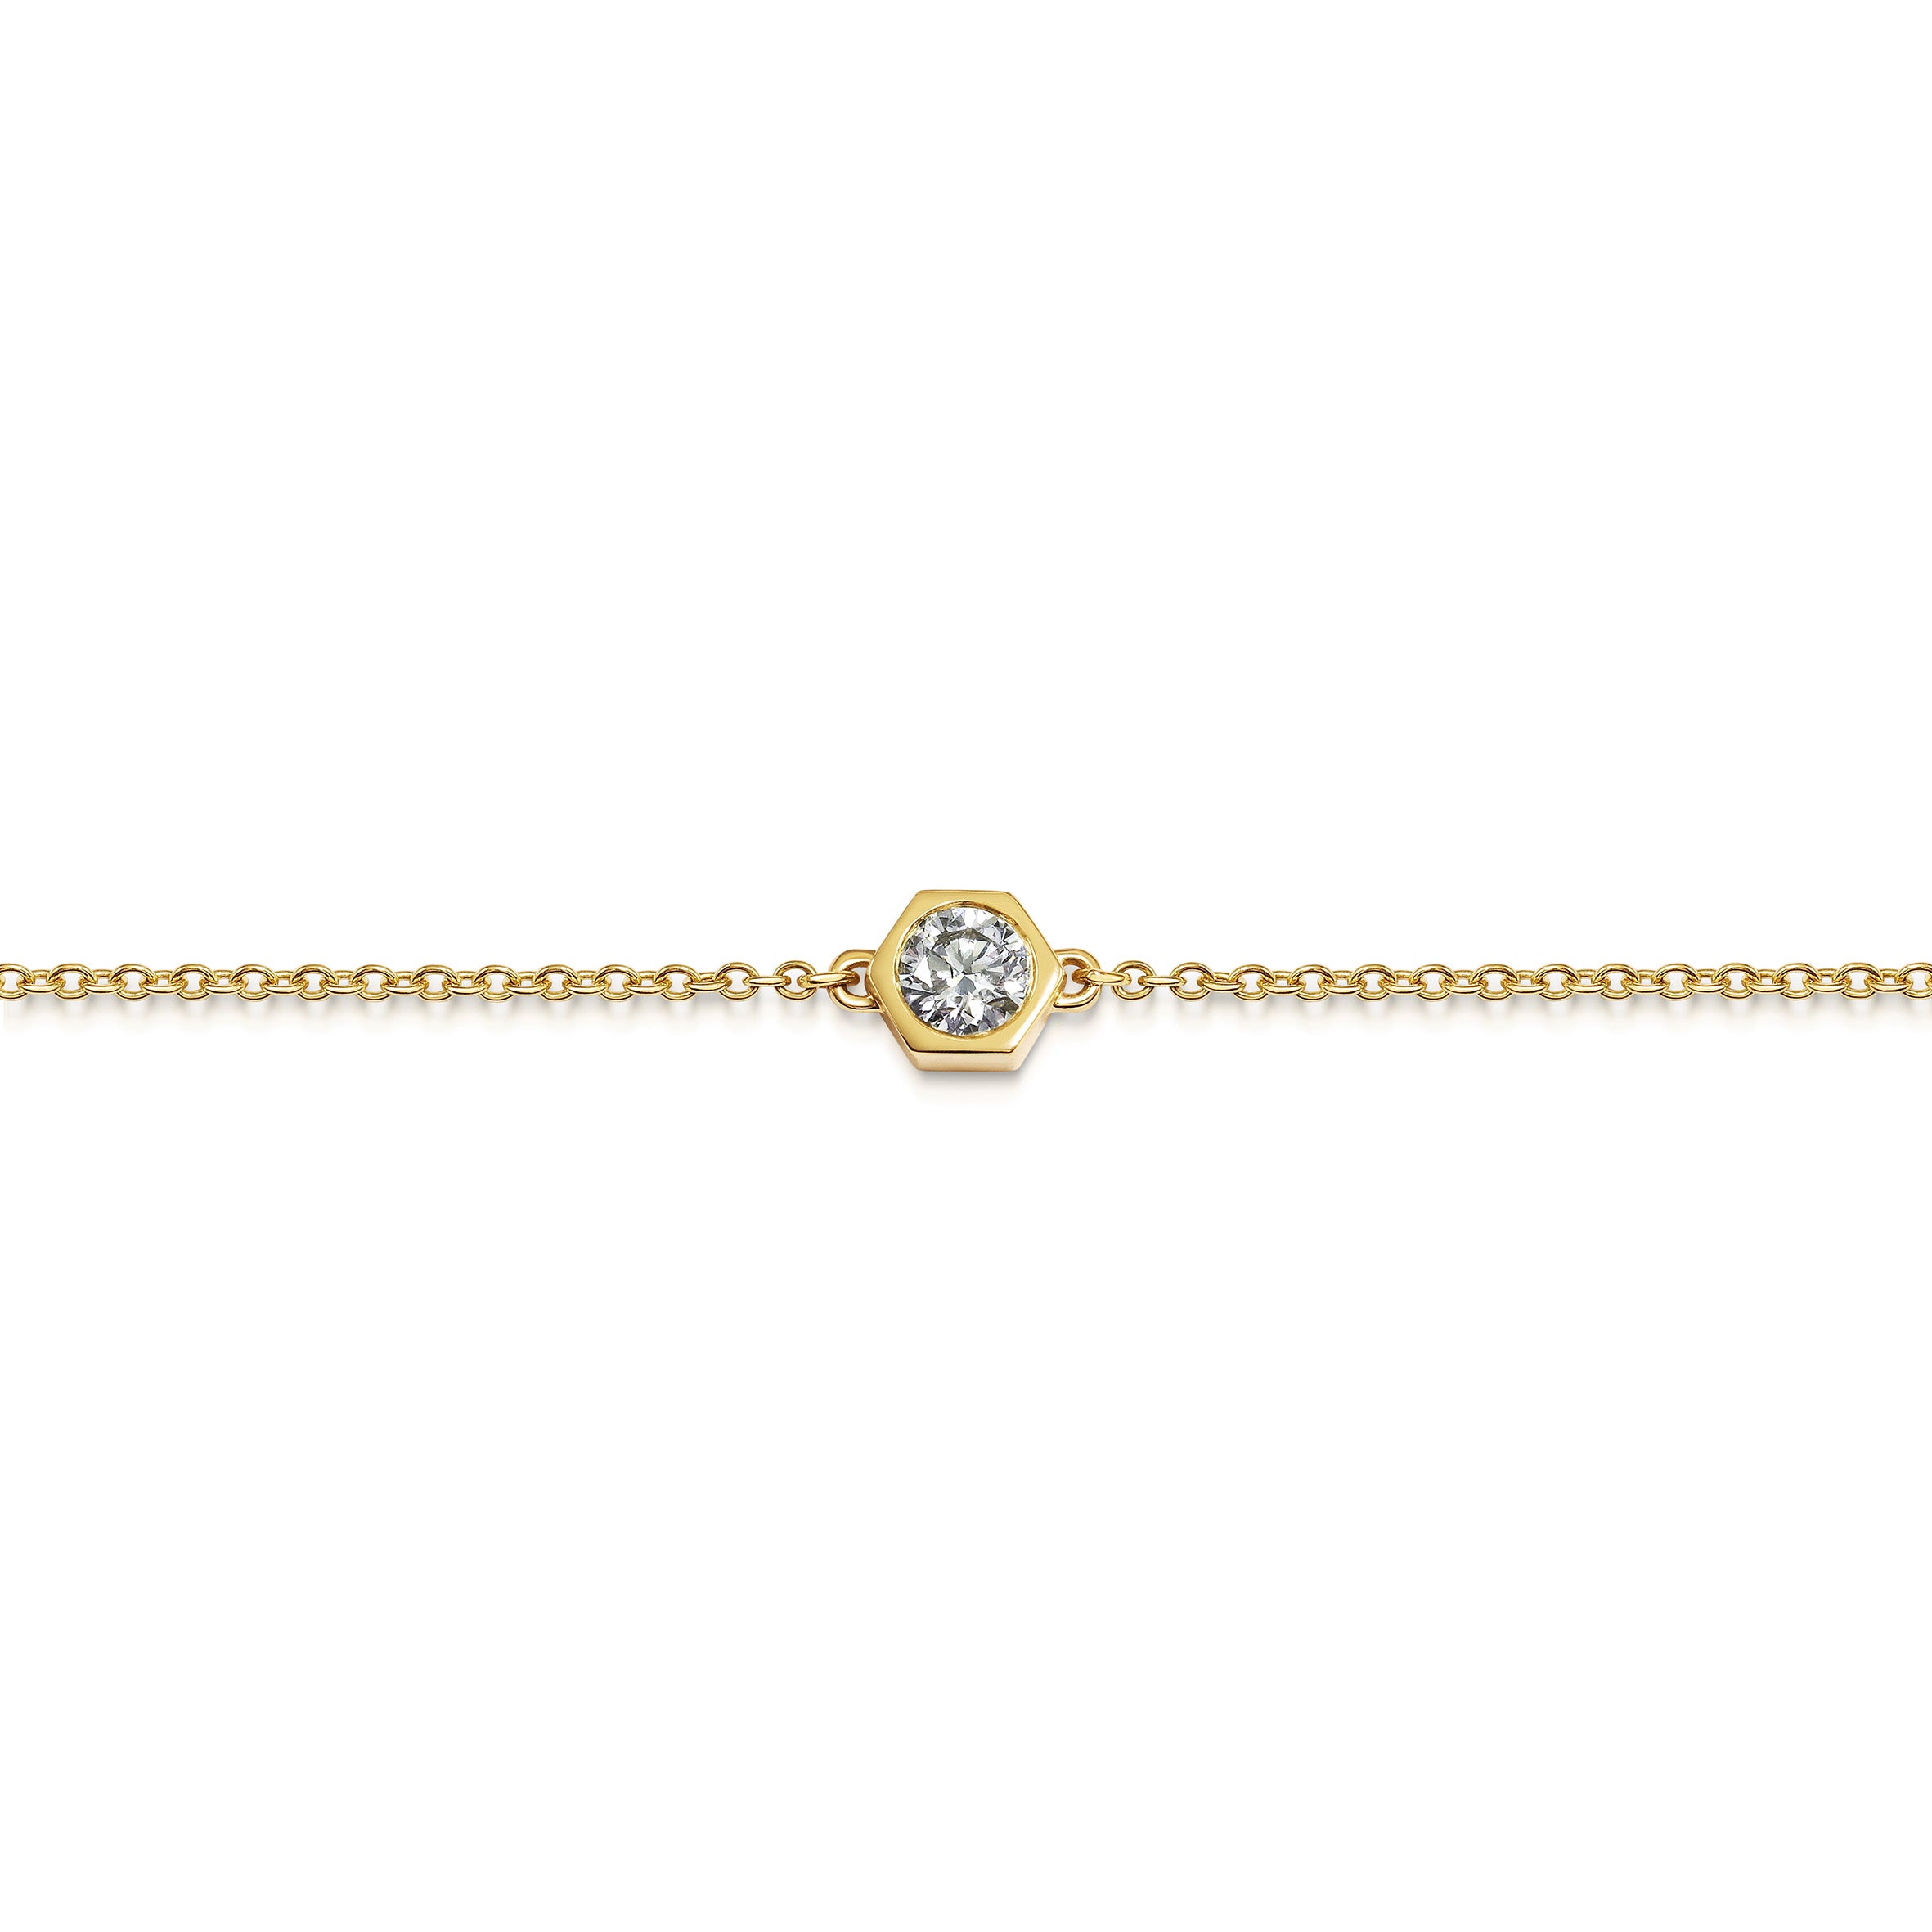 The Diamond Hexagon Bracelet by East London jeweller Rachel Boston | Discover our collections of unique and timeless engagement rings, wedding rings, and modern fine jewellery.